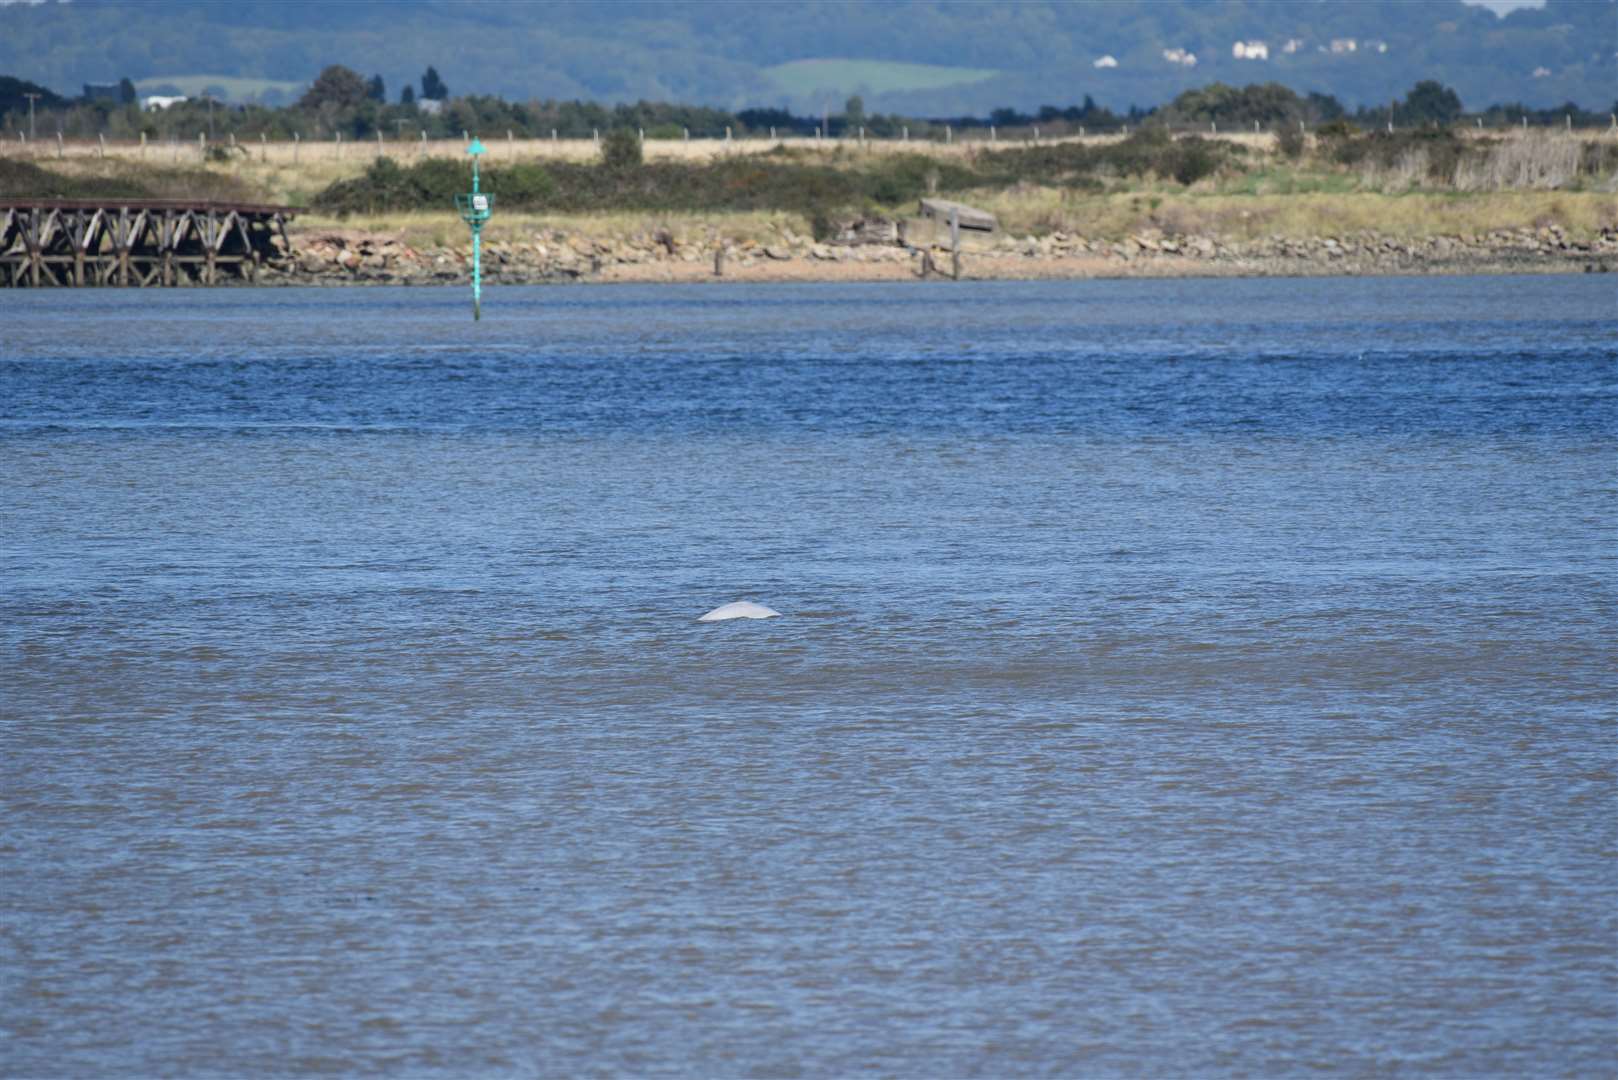 The Beluga poked its head out of the water on multiple occasions. Picture: Fraser Gray.